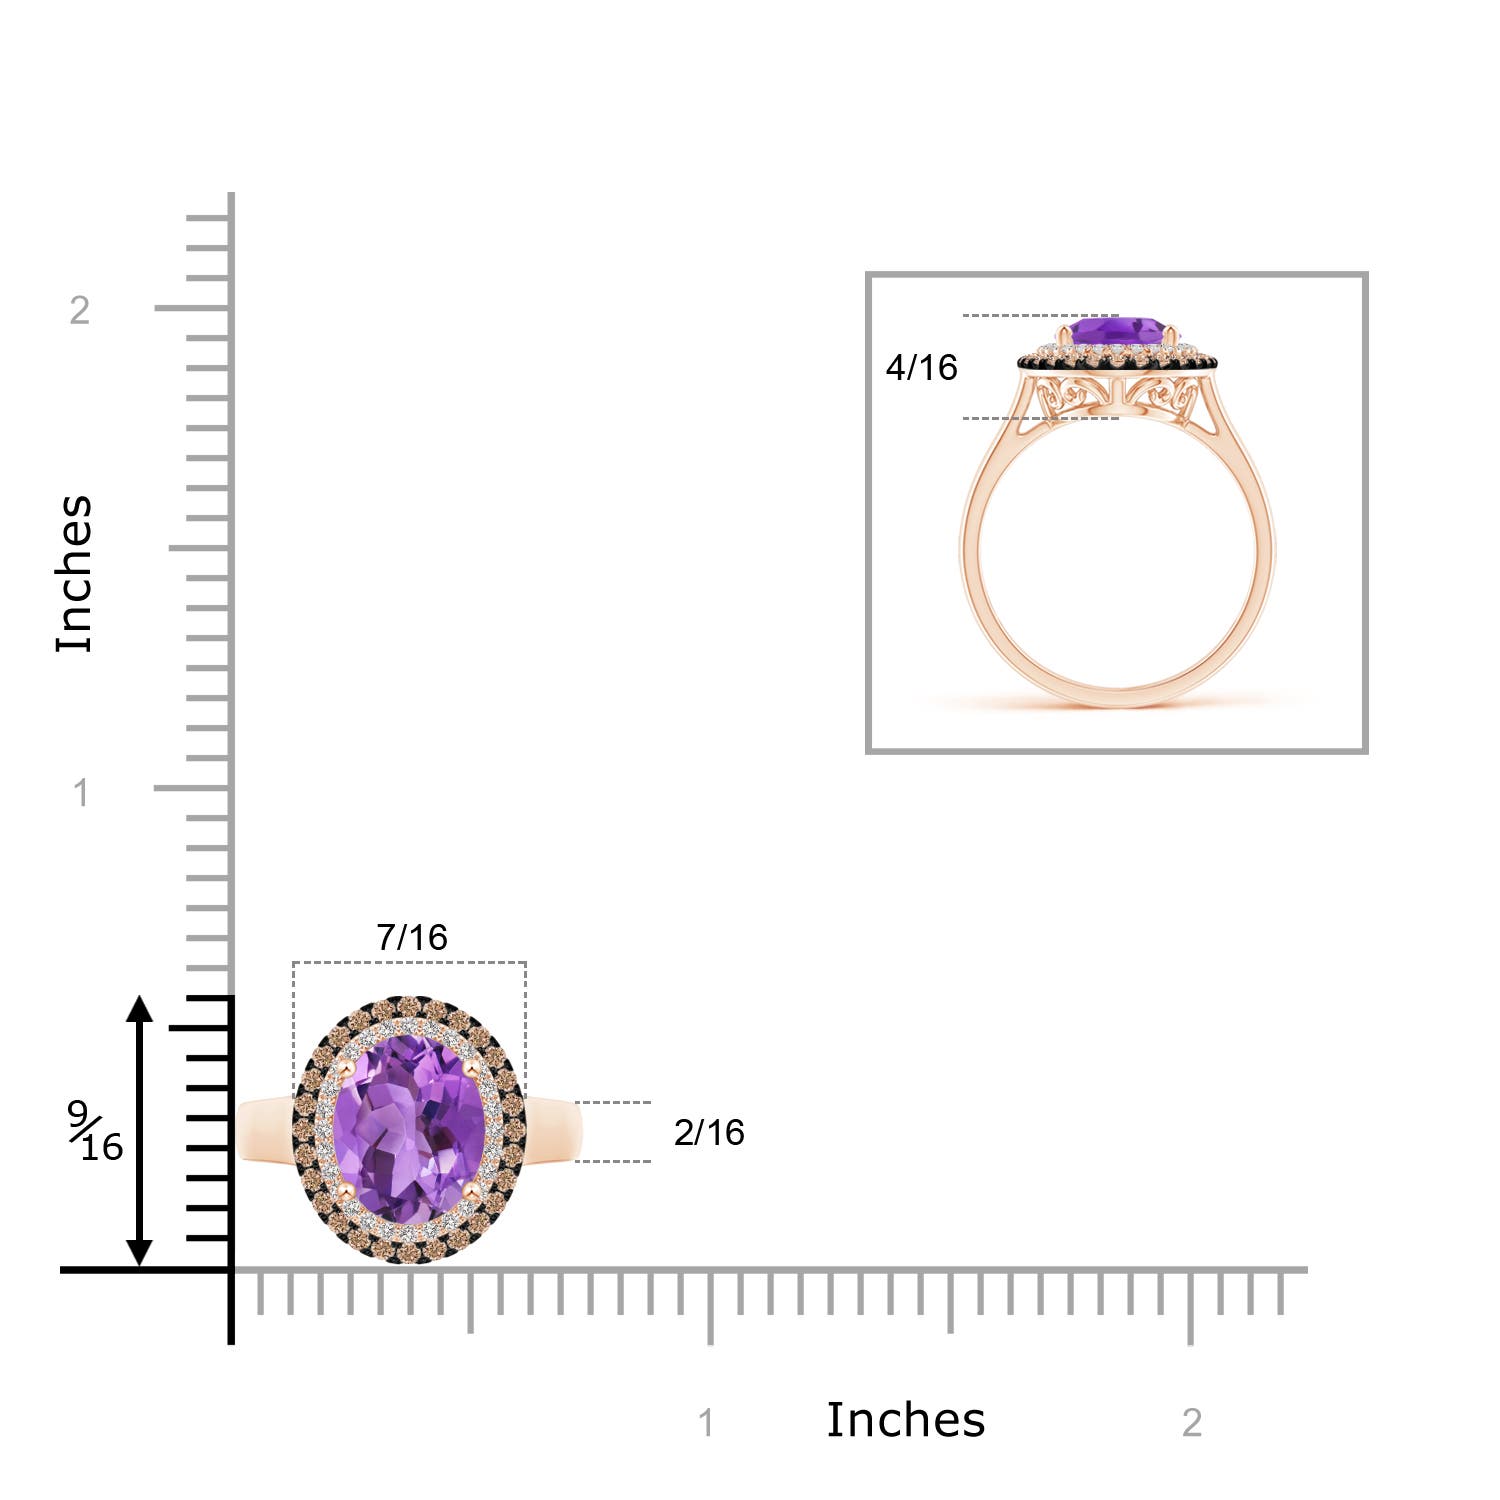 AA - Amethyst / 1.87 CT / 14 KT Rose Gold